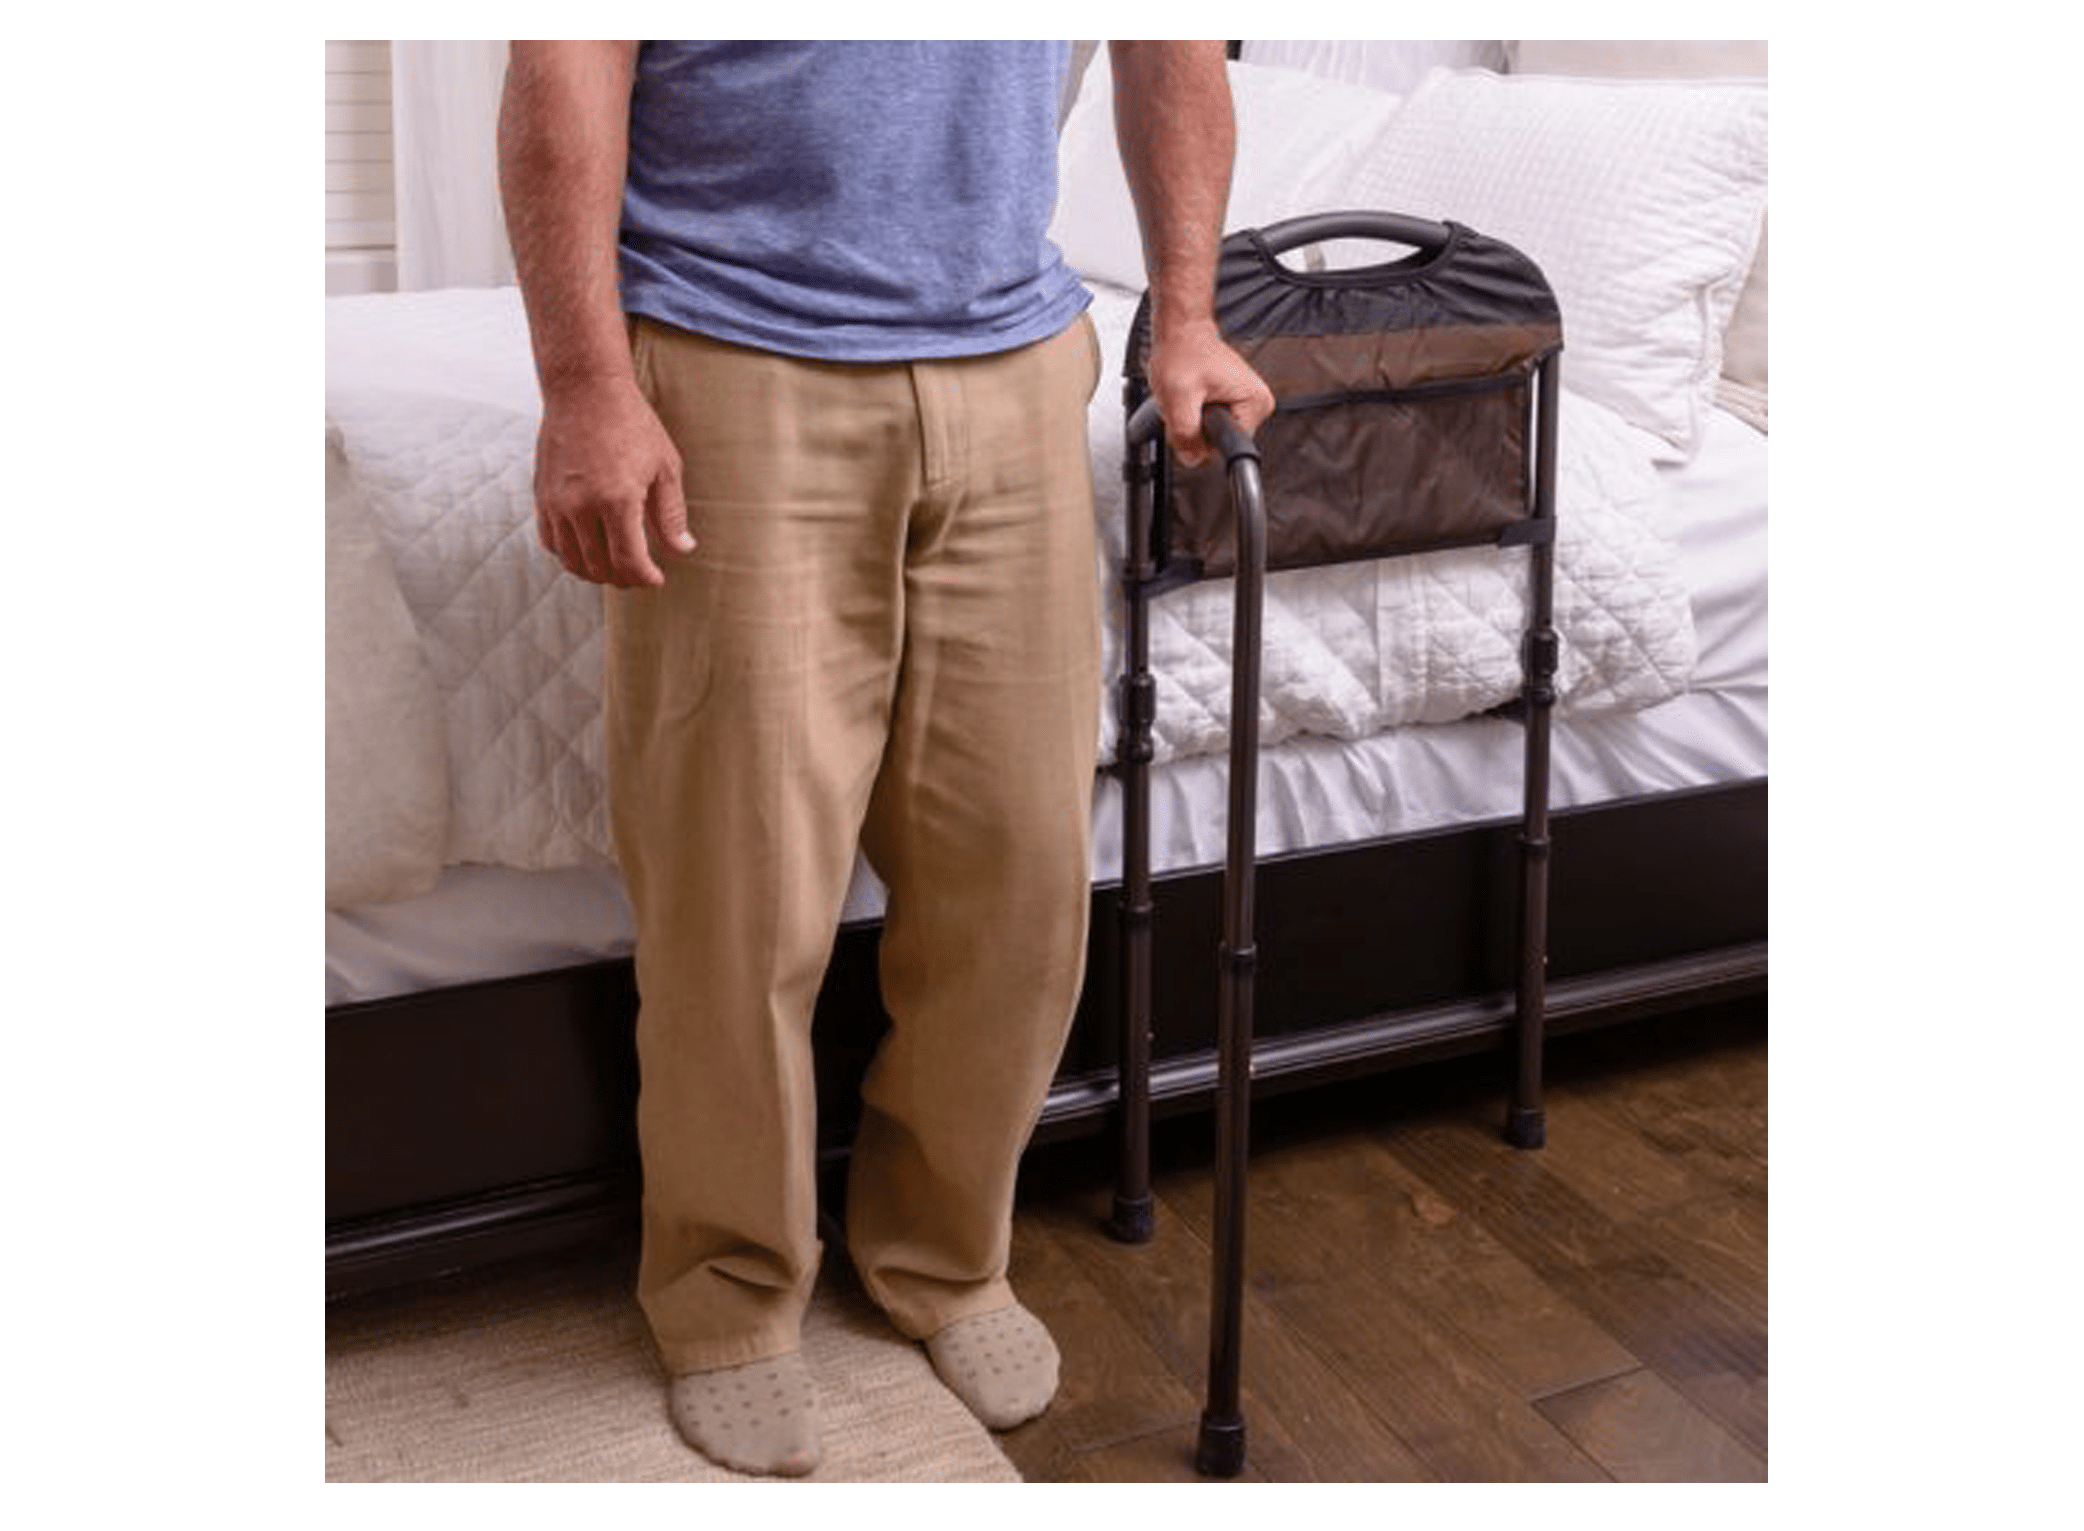 mobility bed rail